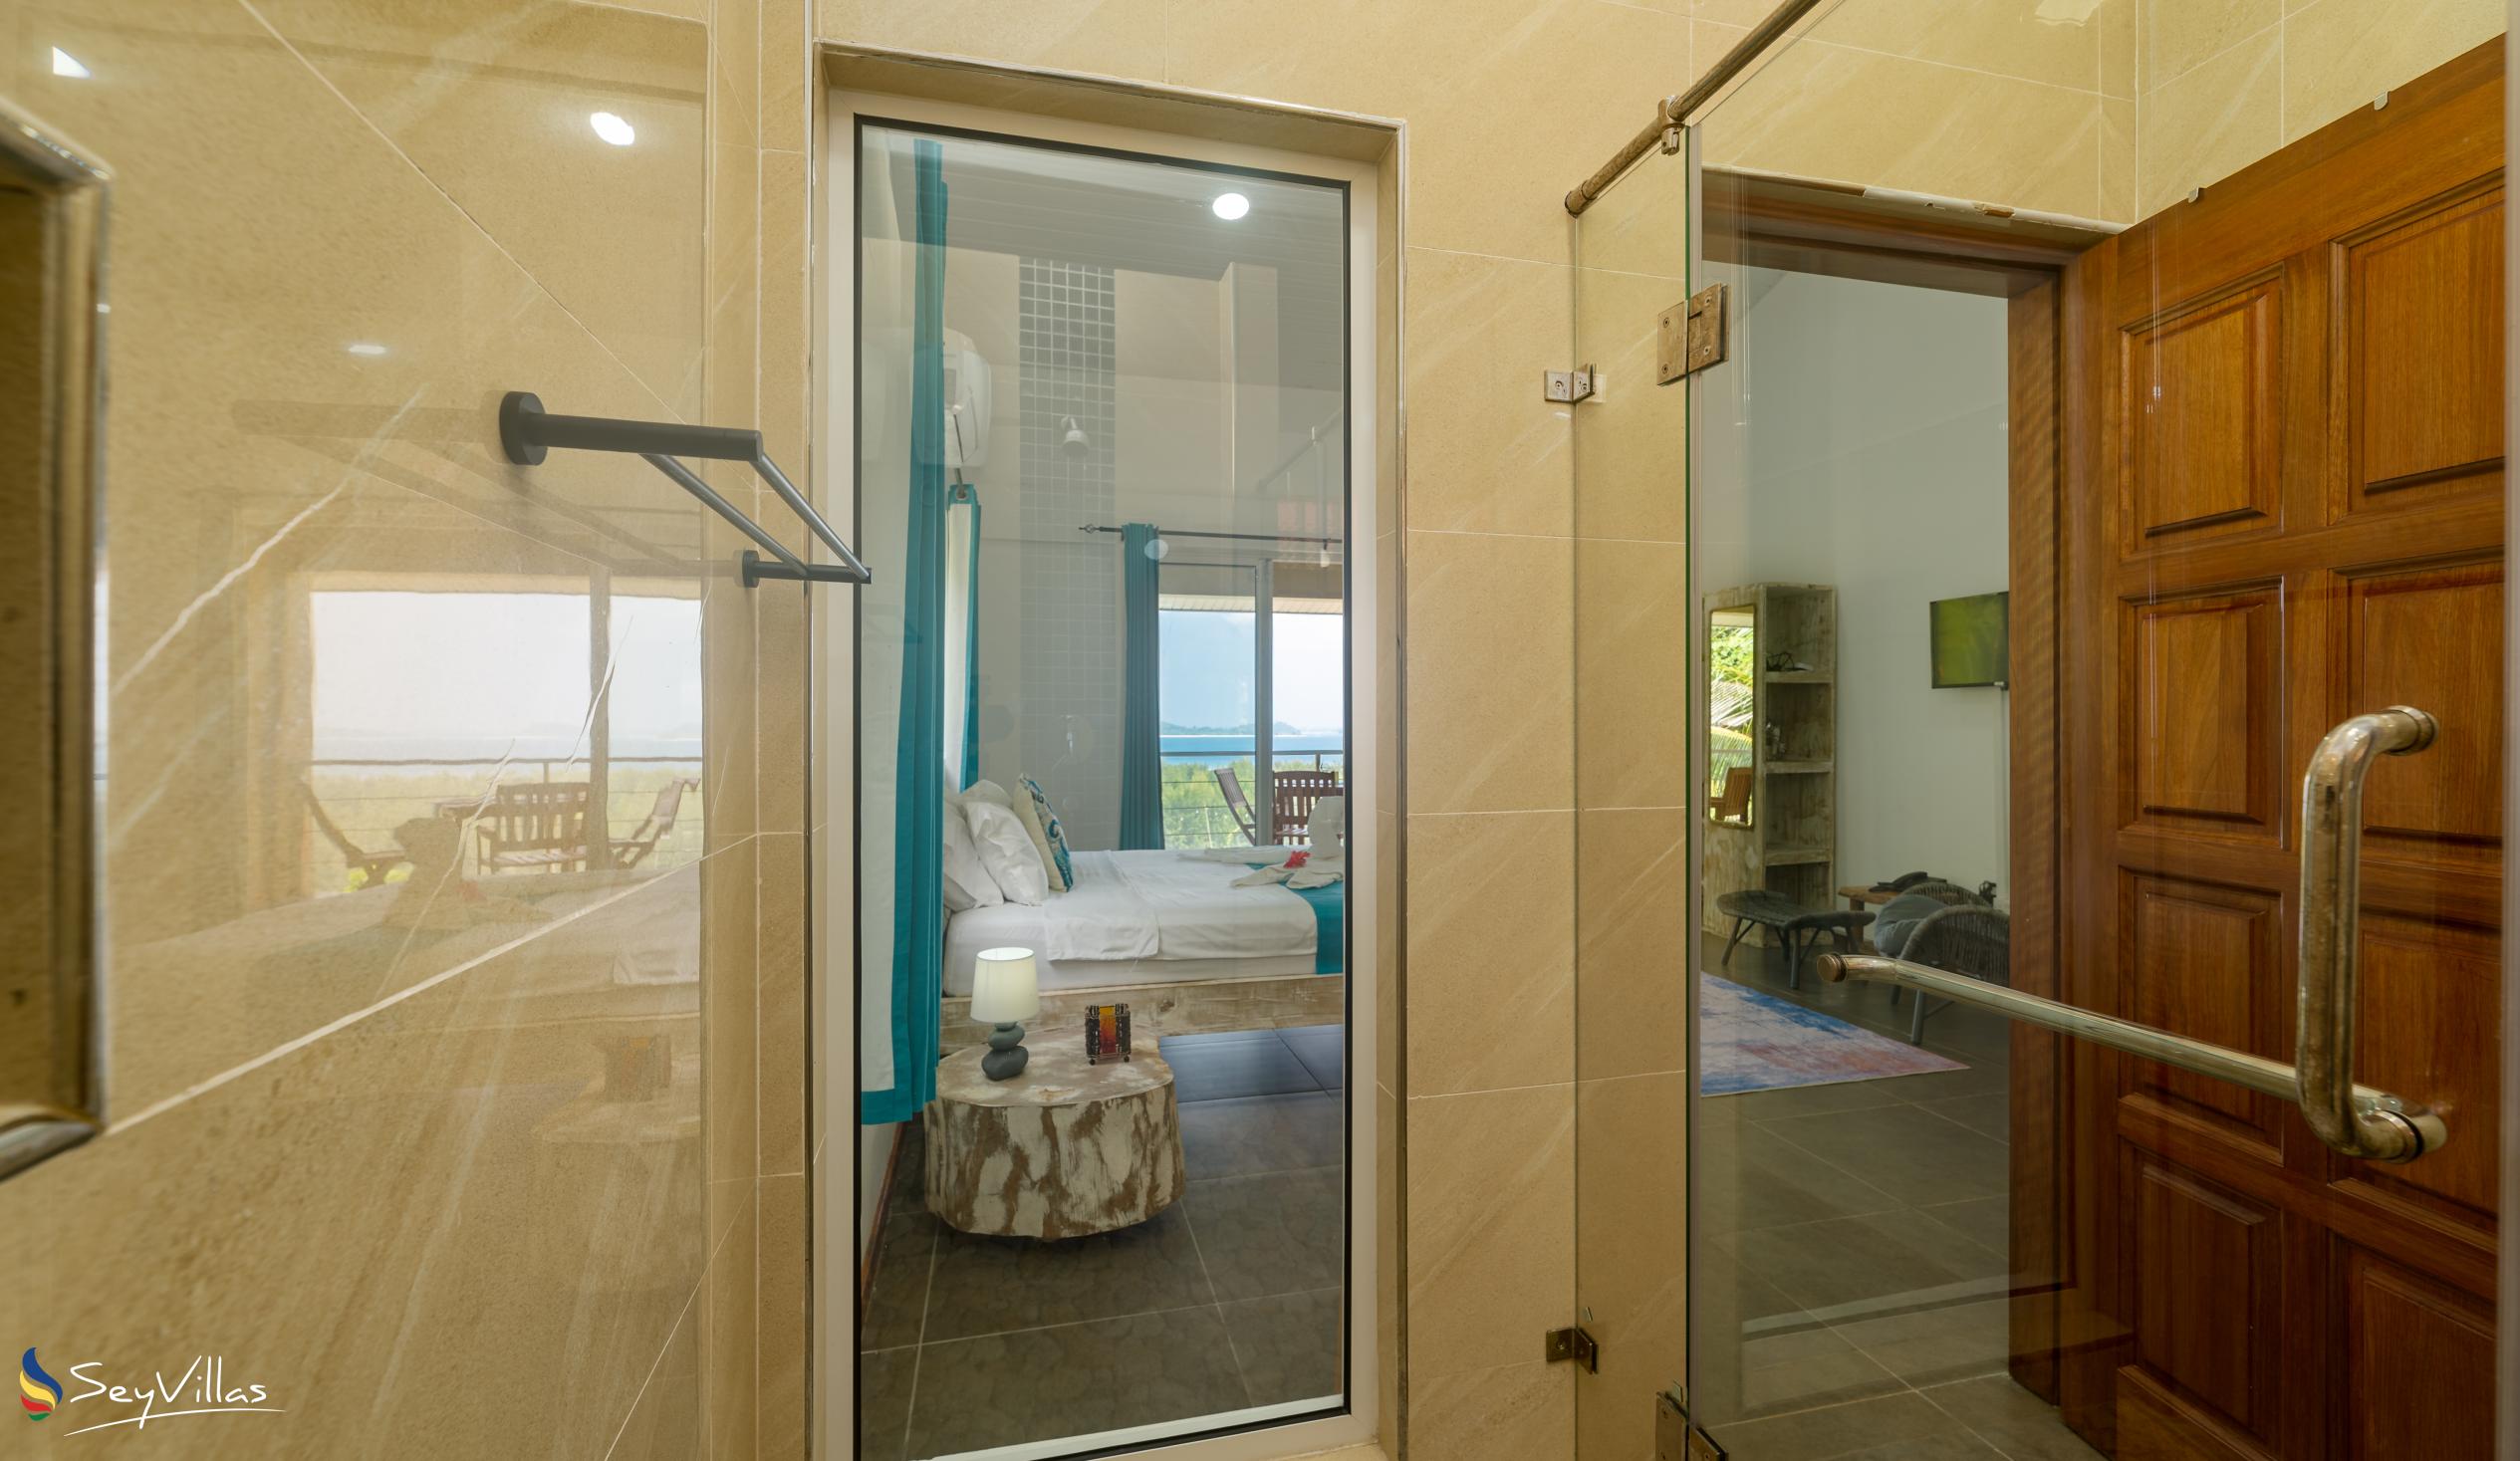 Photo 50: Auguste Holiday Residence - 1-Bedroom Apartment - Mahé (Seychelles)